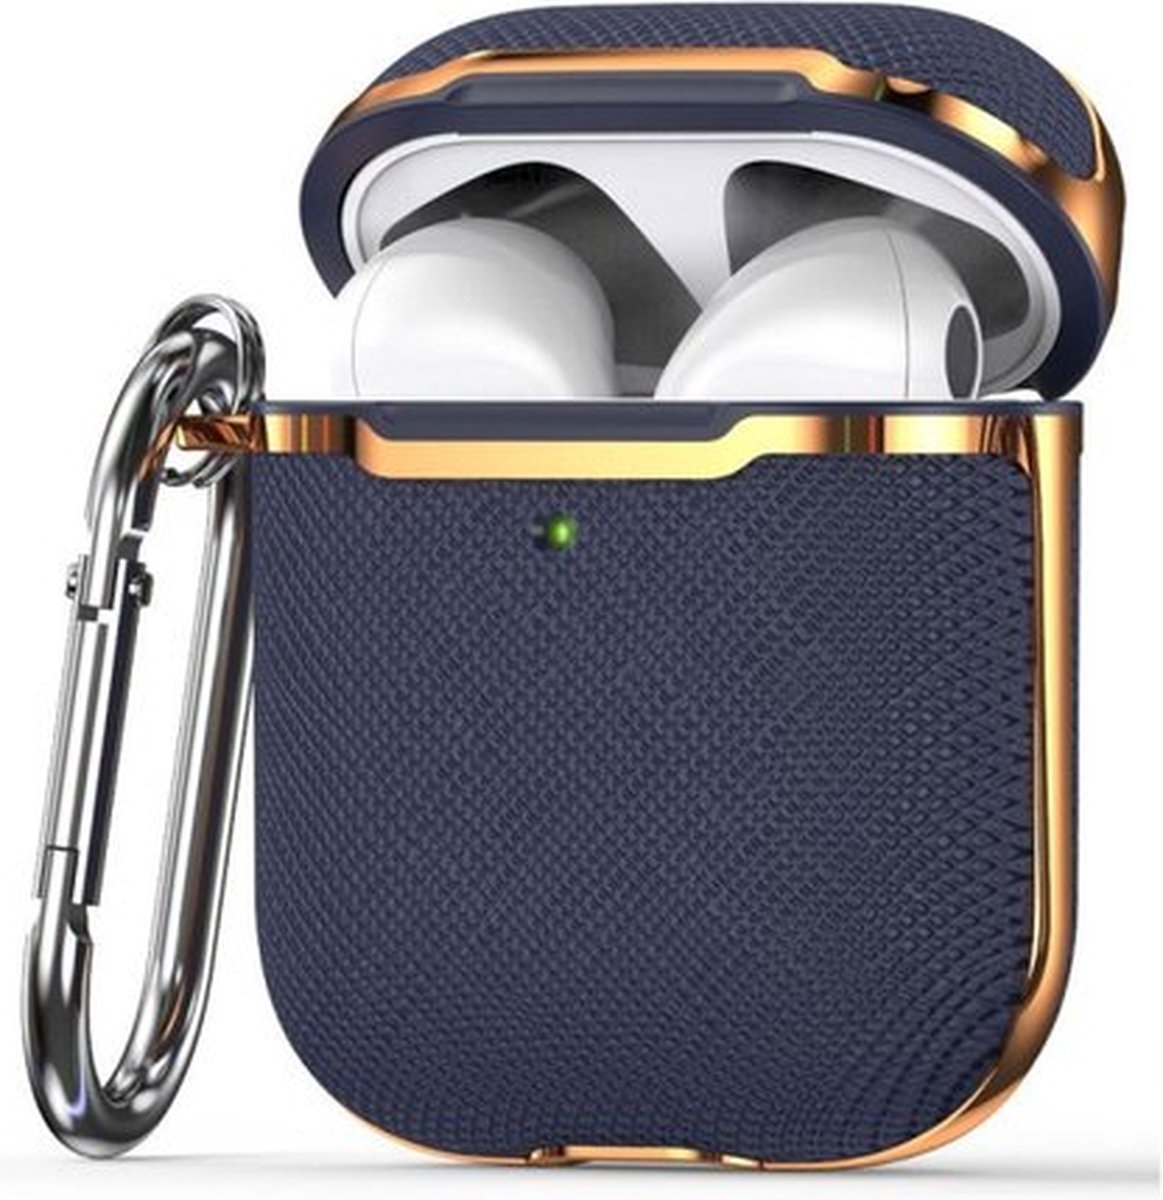 AirPods hoesjes van By Qubix AirPods 1-2 hoesje - Hardcase - Plated series - Blauw + Goud Airpods Case Hoesje voor Airpods Airpods 1 Airpods 2 Hoes